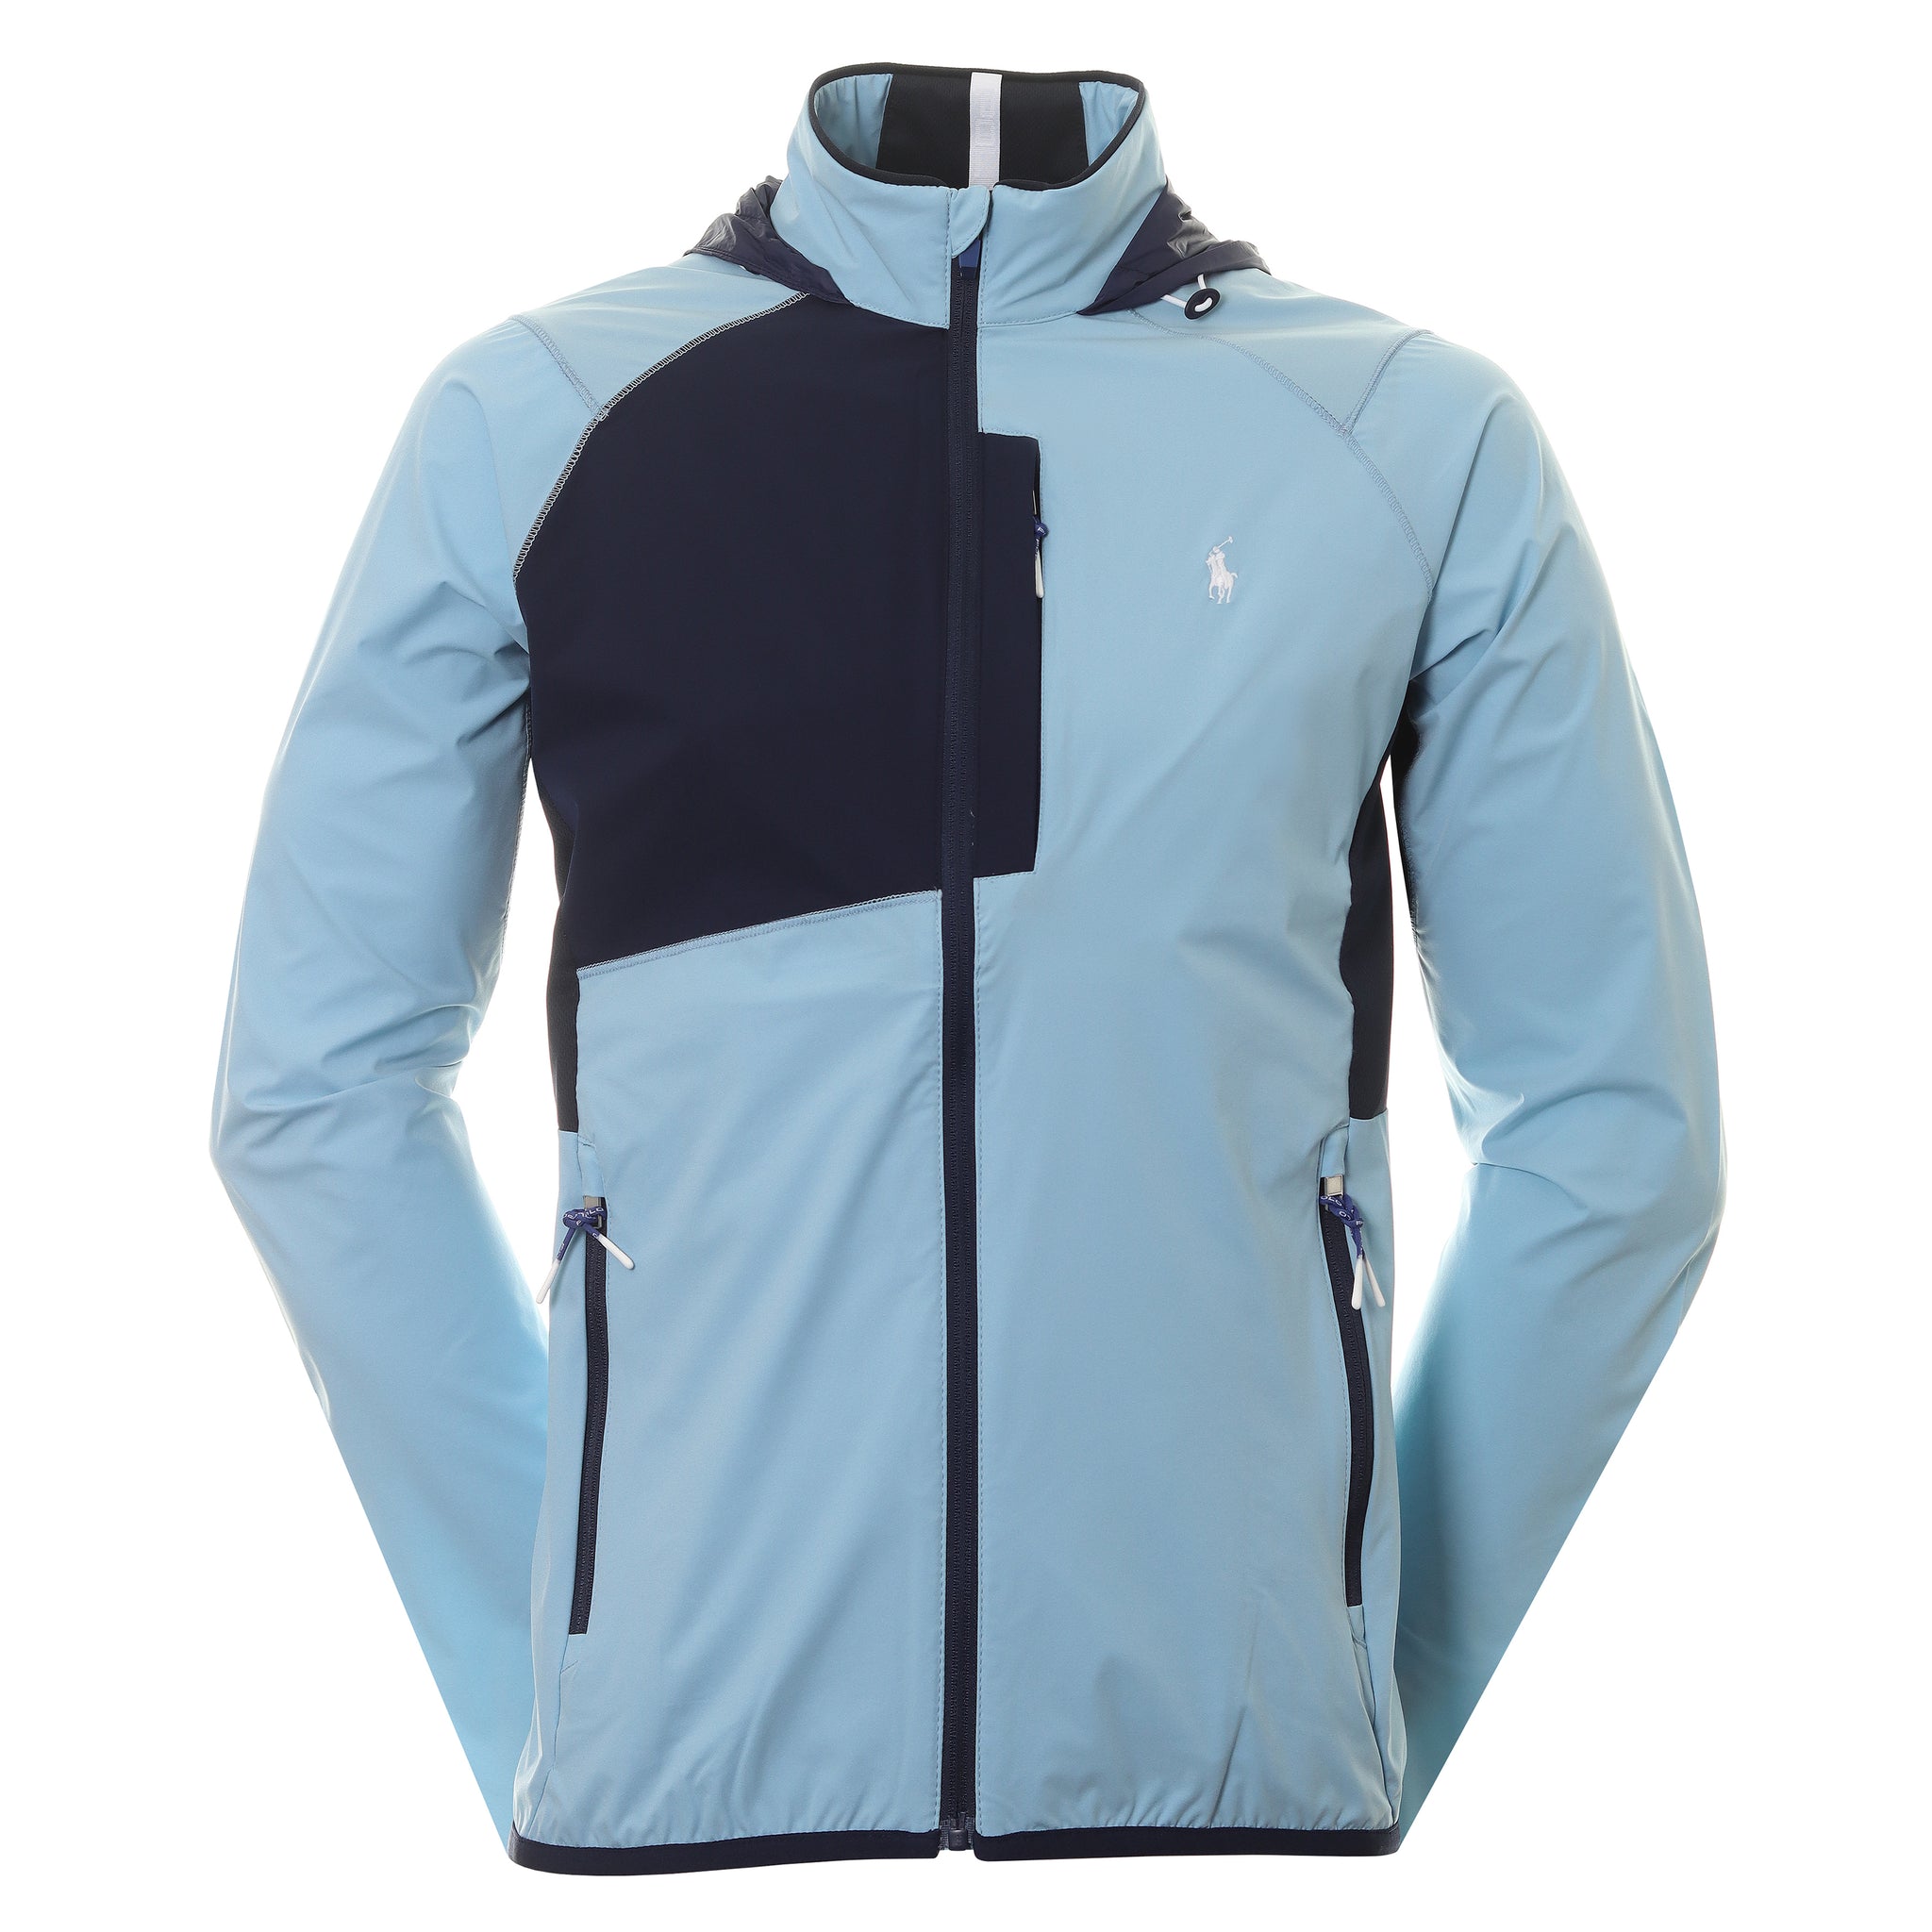 polo-golf-ralph-lauren-packable-hooded-jacket-710890718-powder-blue-french-navy-001